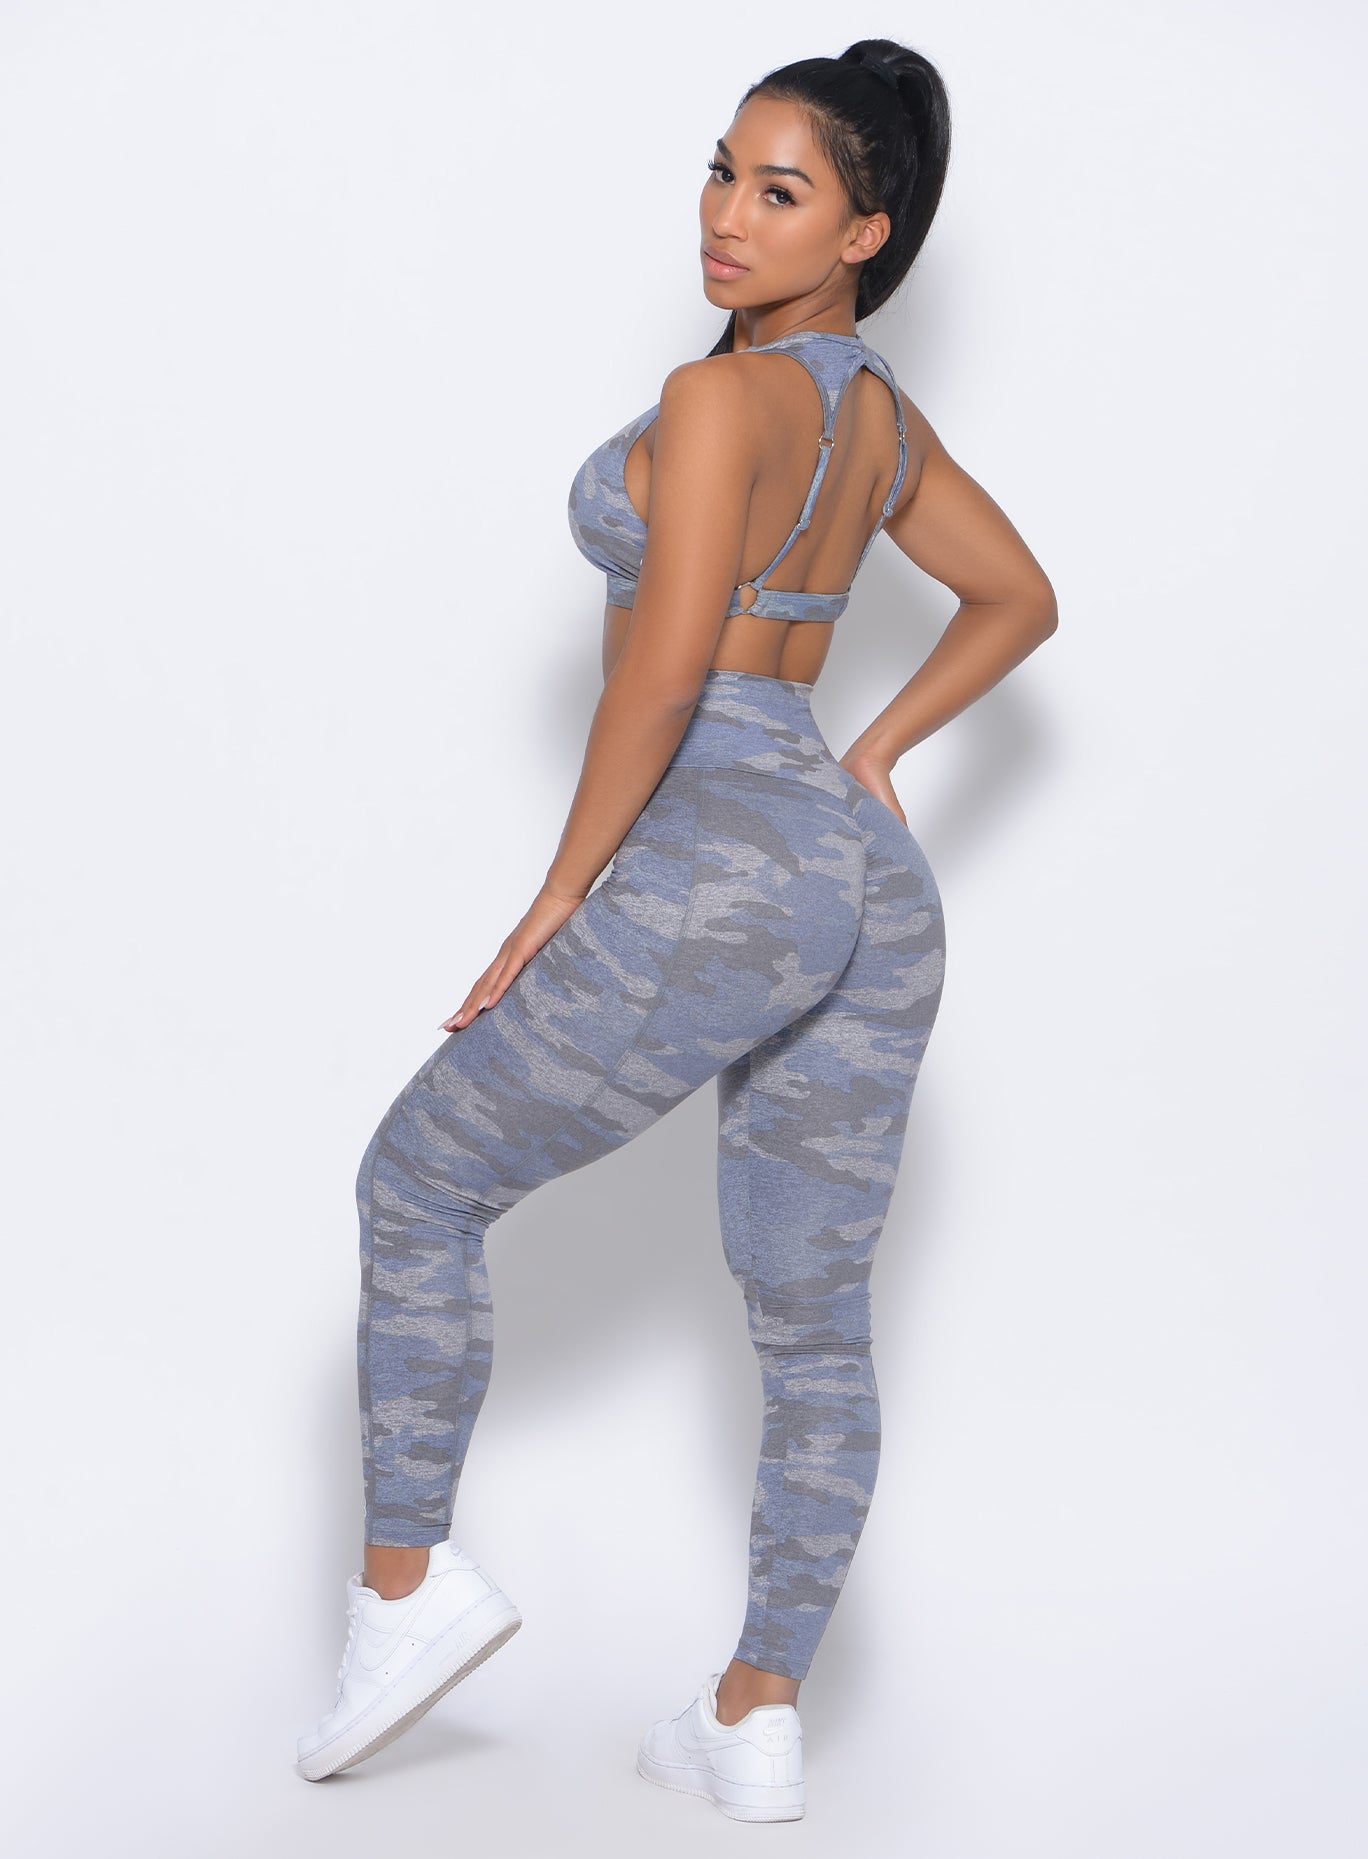 Left side view of the model facing to her left in our Brazilian contour leggings in silver camo color and a matching bra